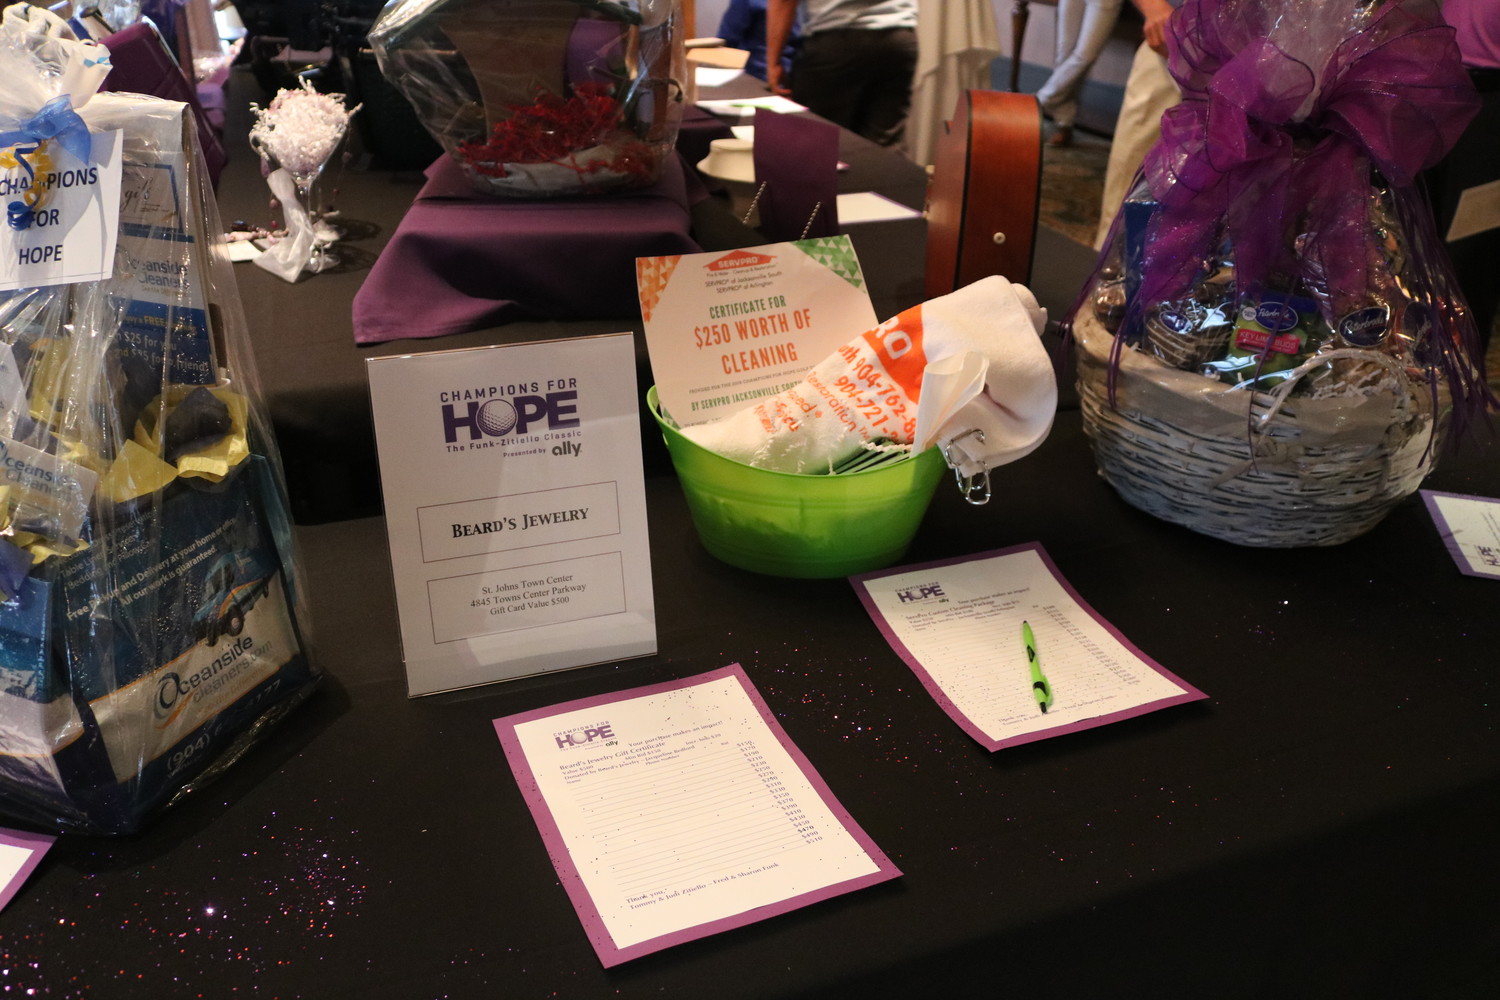 The Champions for Hope gala included a number of items up for auction.